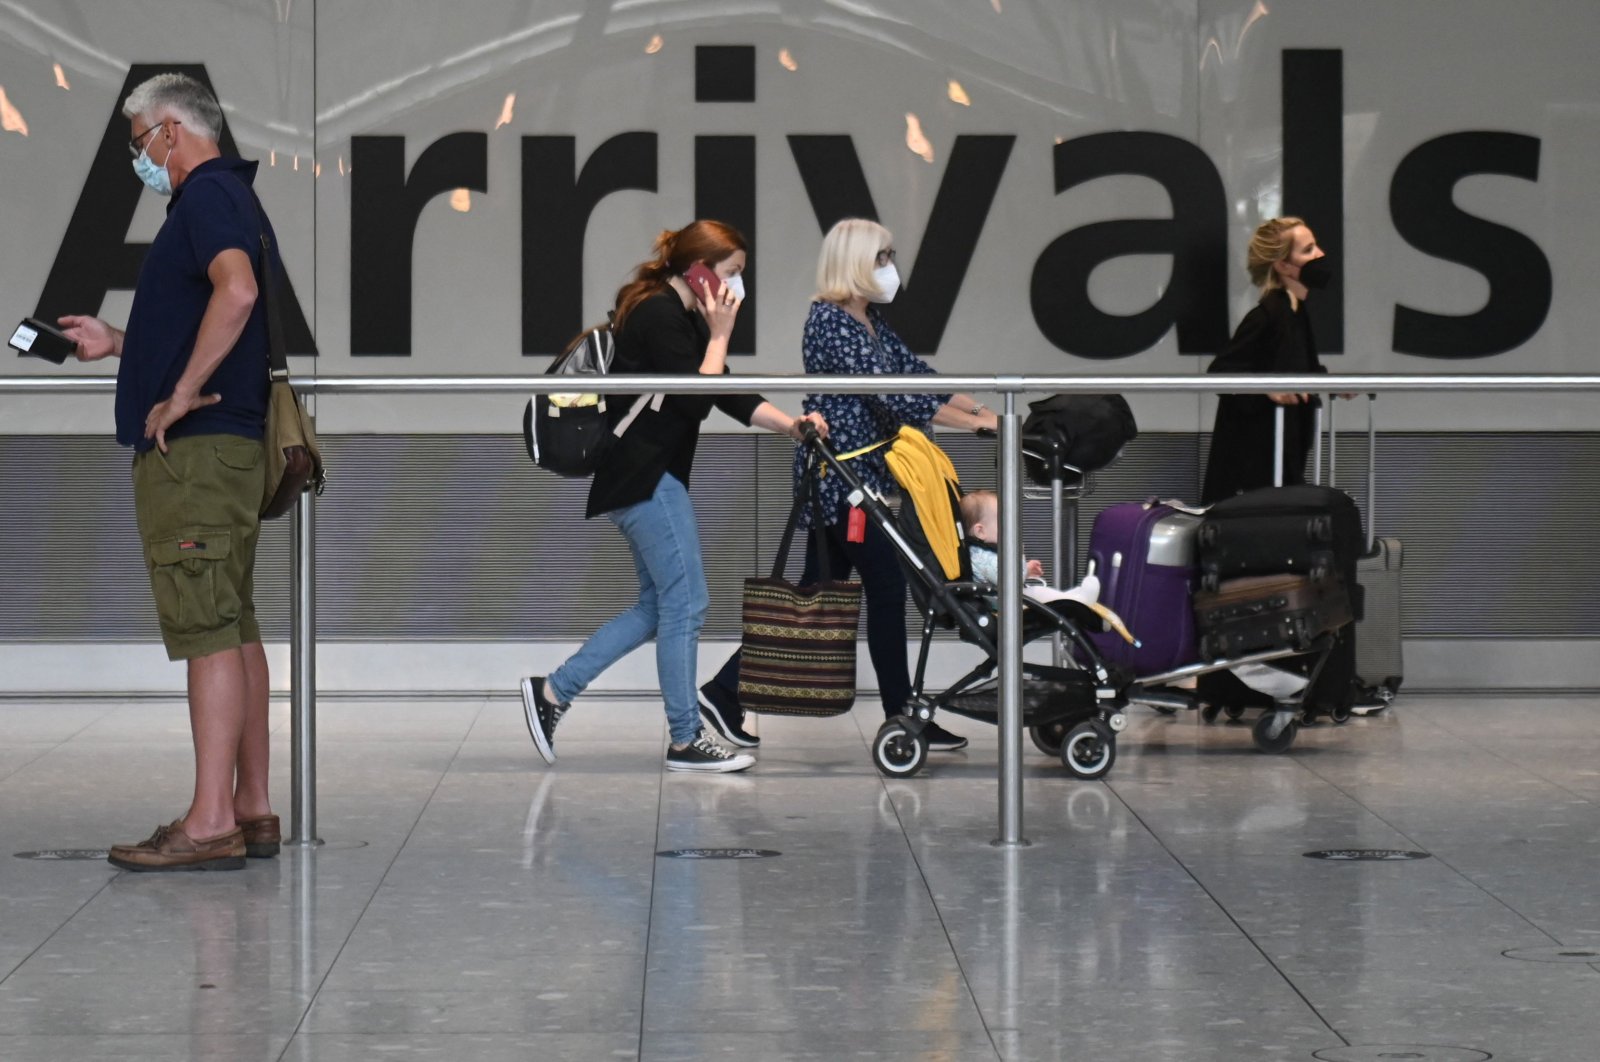 Passengers push their luggage on arrival in Terminal 5 at Heathrow airport, London, June 3, 2021. (AFP Photo)